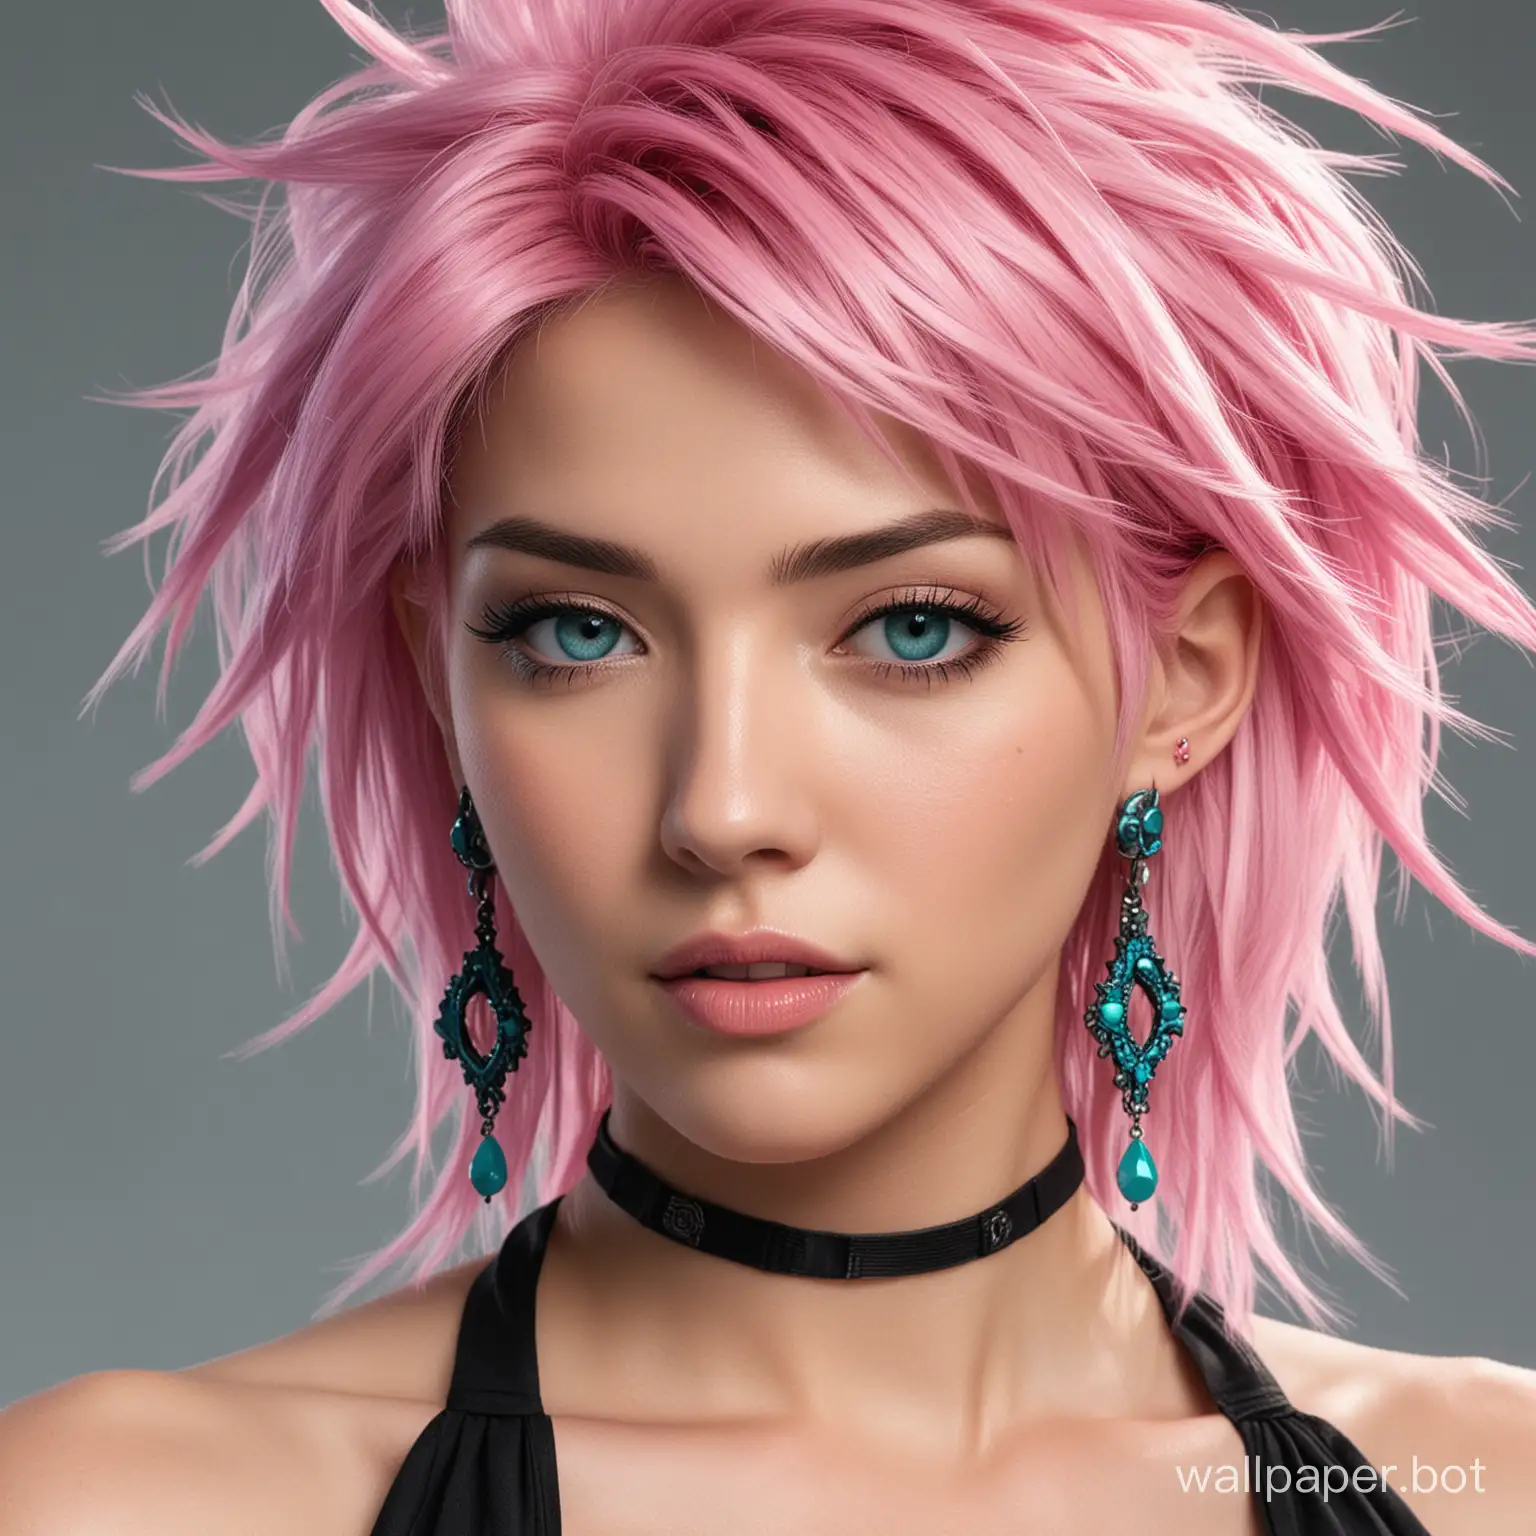 TurquoiseHaired-Character-in-Fantasy-Attire-with-Pink-Earrings-Portrait-Shot